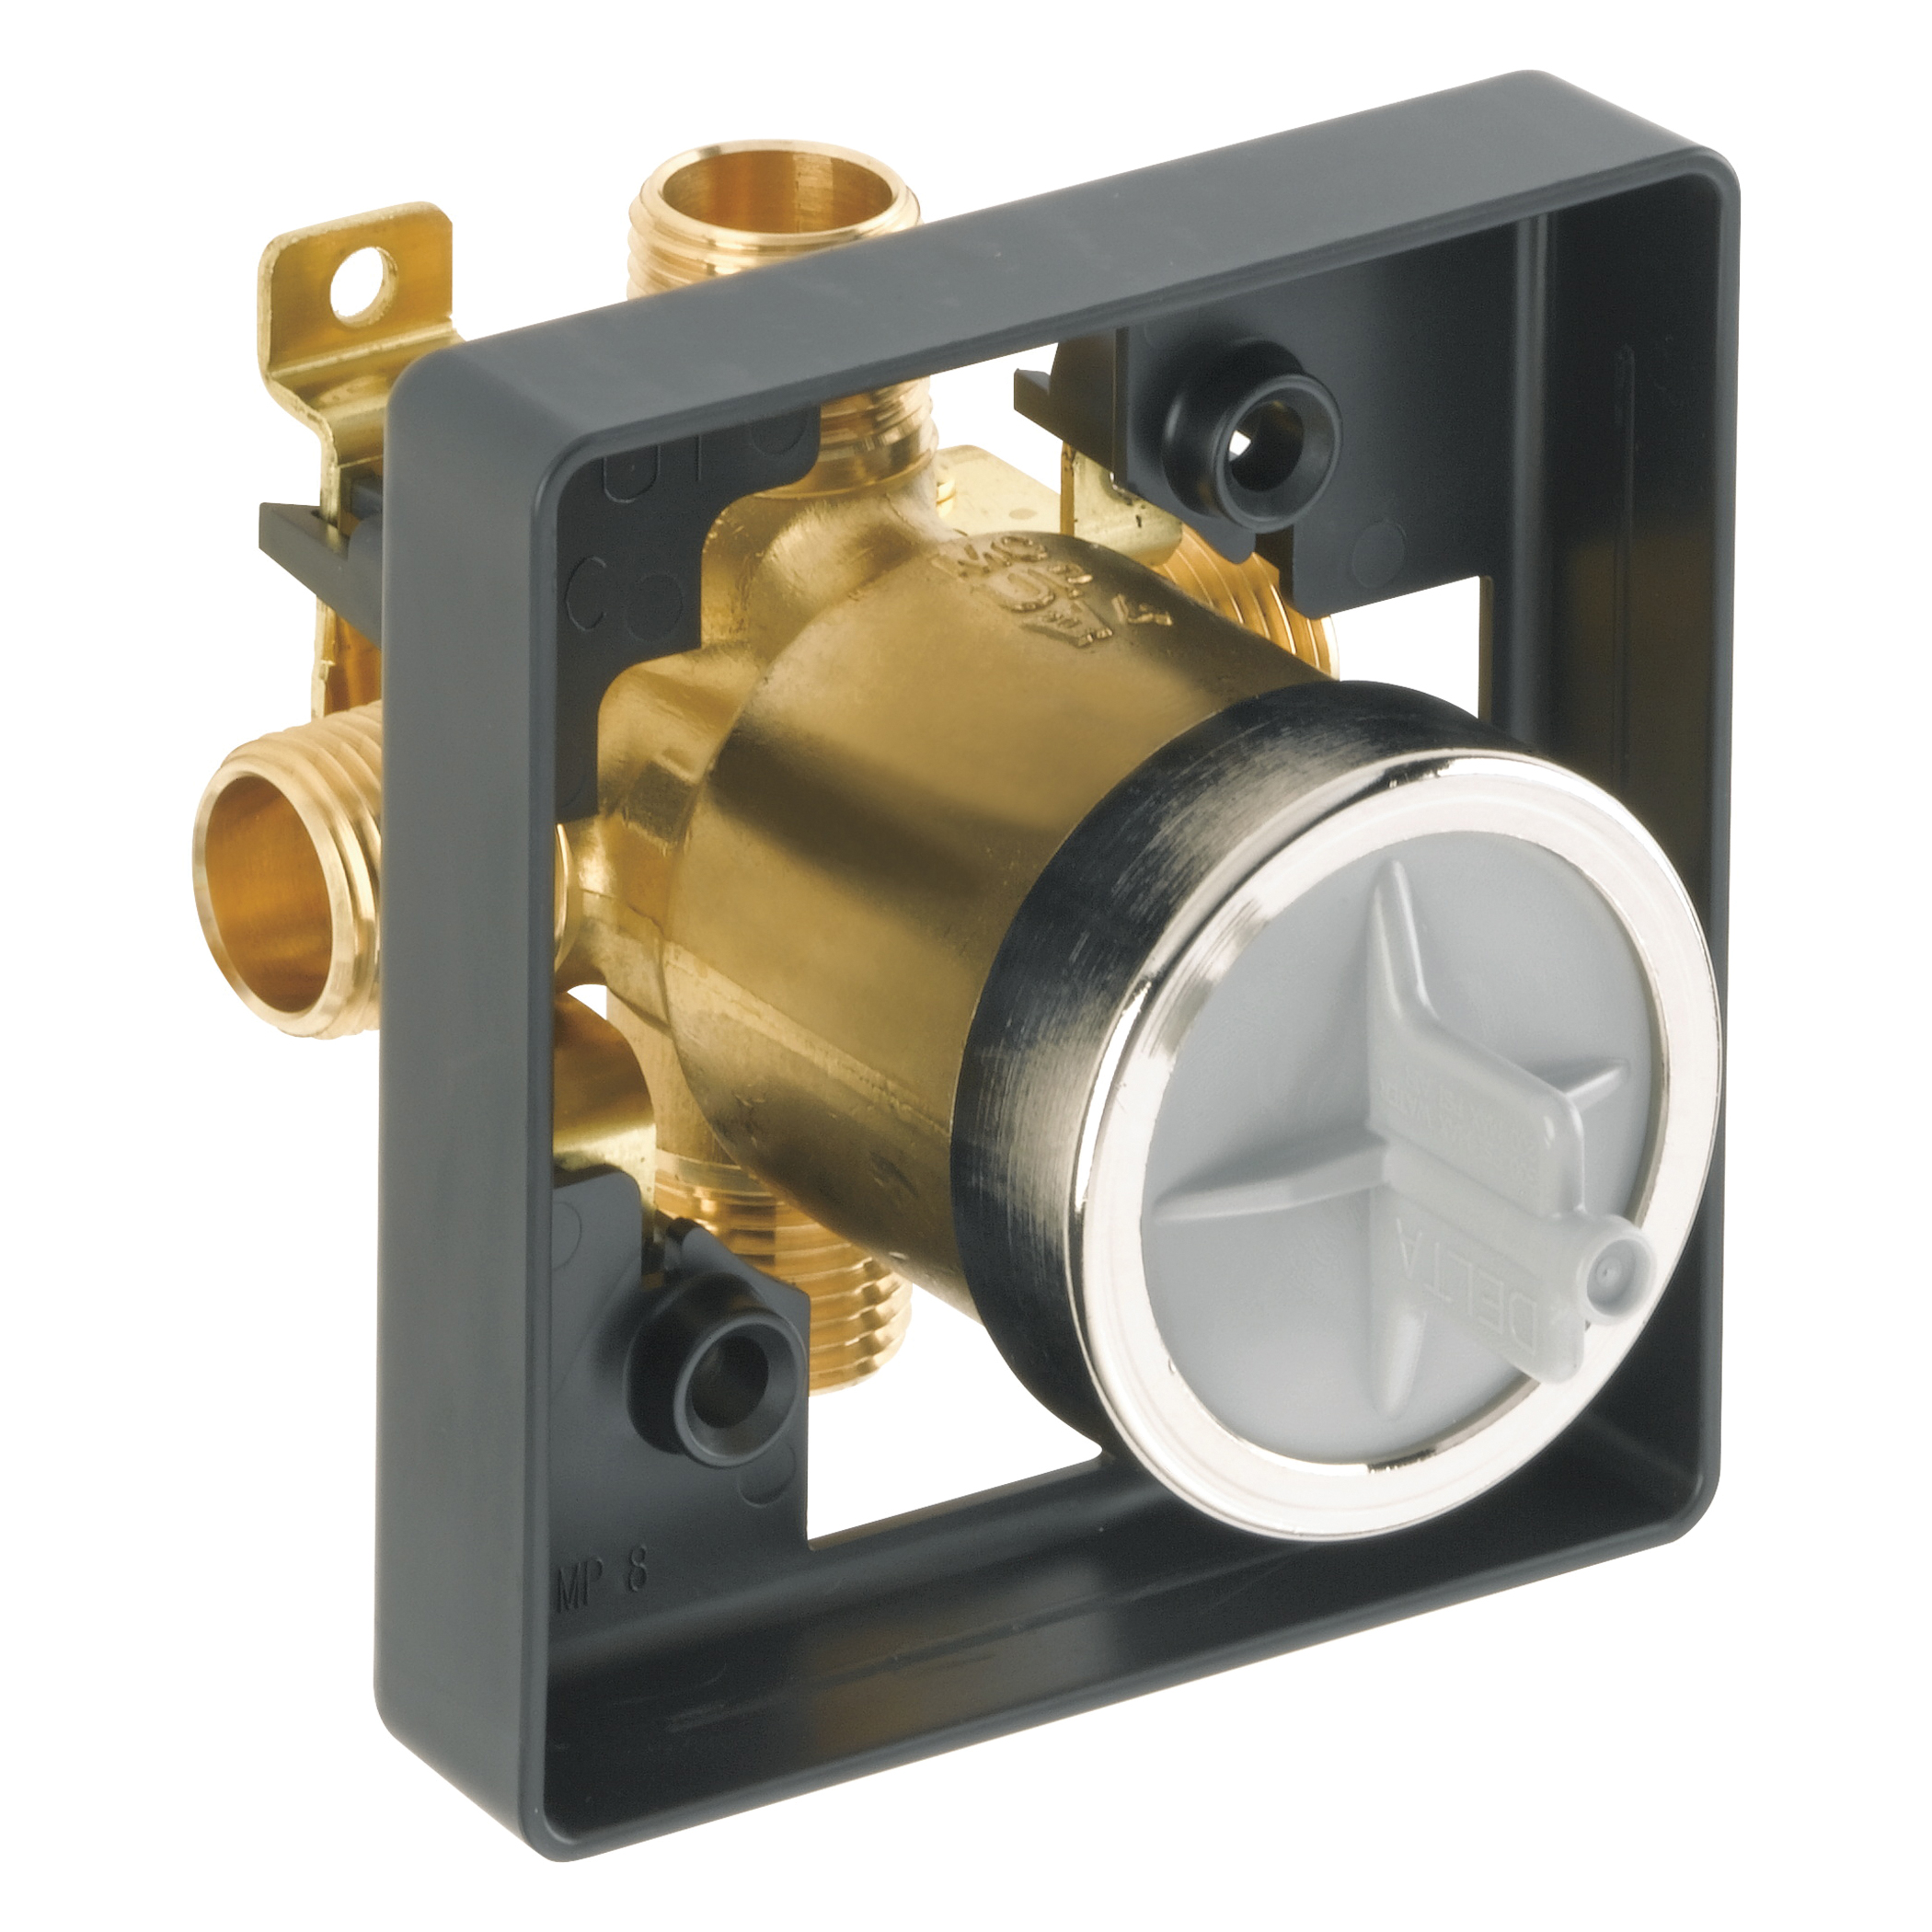 DELTA® R10000-UNBX Universal Tub and Shower Rough-In Valve Body, Forged Brass Body, Domestic